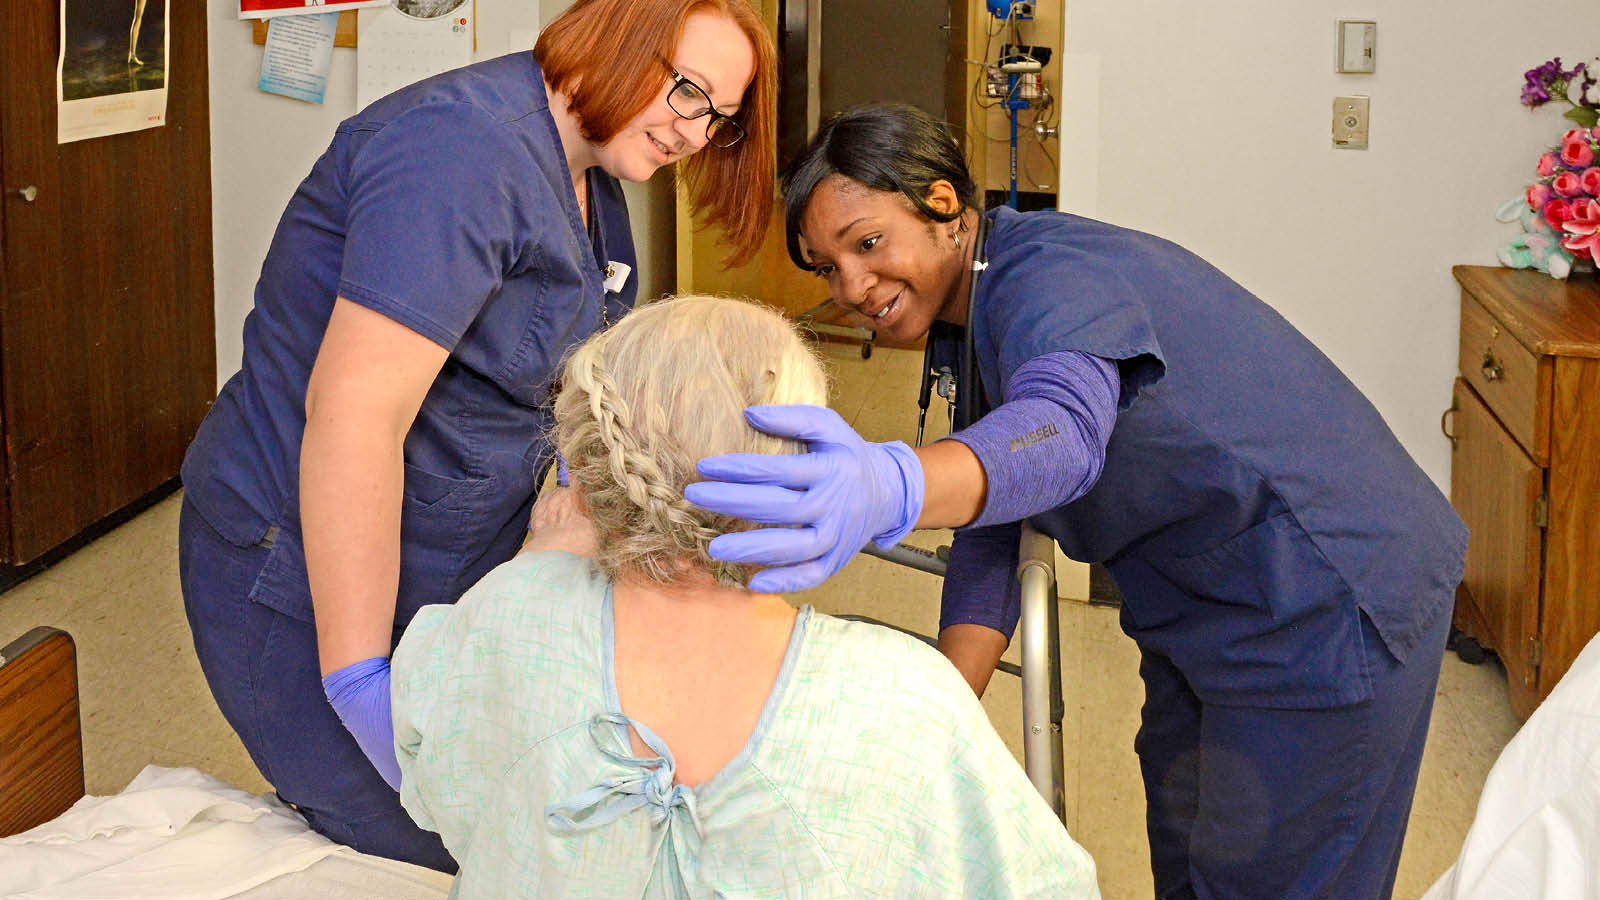 Healthcare professional students working with a patient